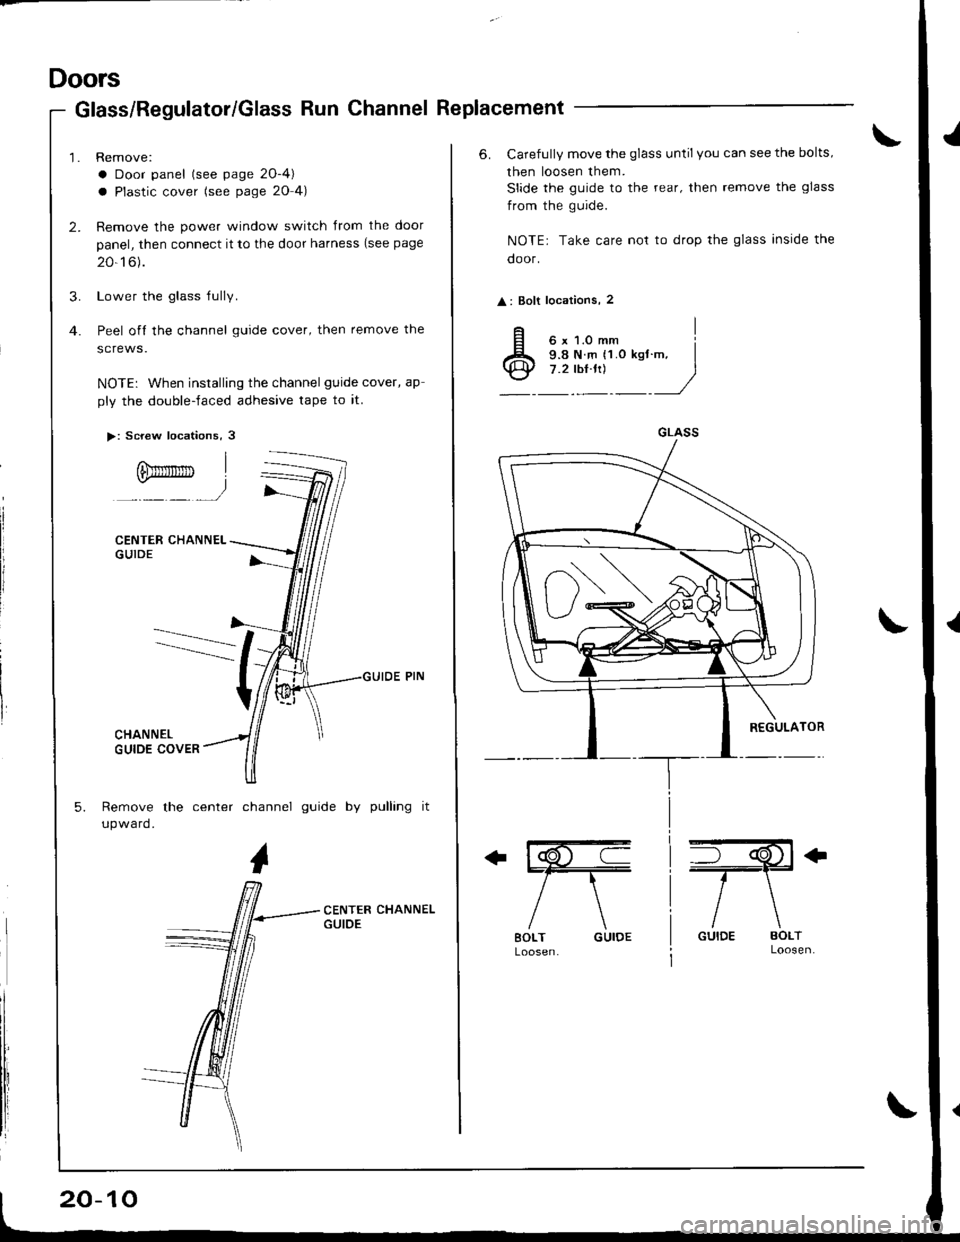 ACURA INTEGRA 1998  Service Repair Manual Doors
Glass/Regulator/Glass Run Channel Replacement
Remove:
a Door panel (see page 2O-4)
a Plastic cover (see page 20 4)
Remove the power window switch Jrom the door
panel, then connect it to the door